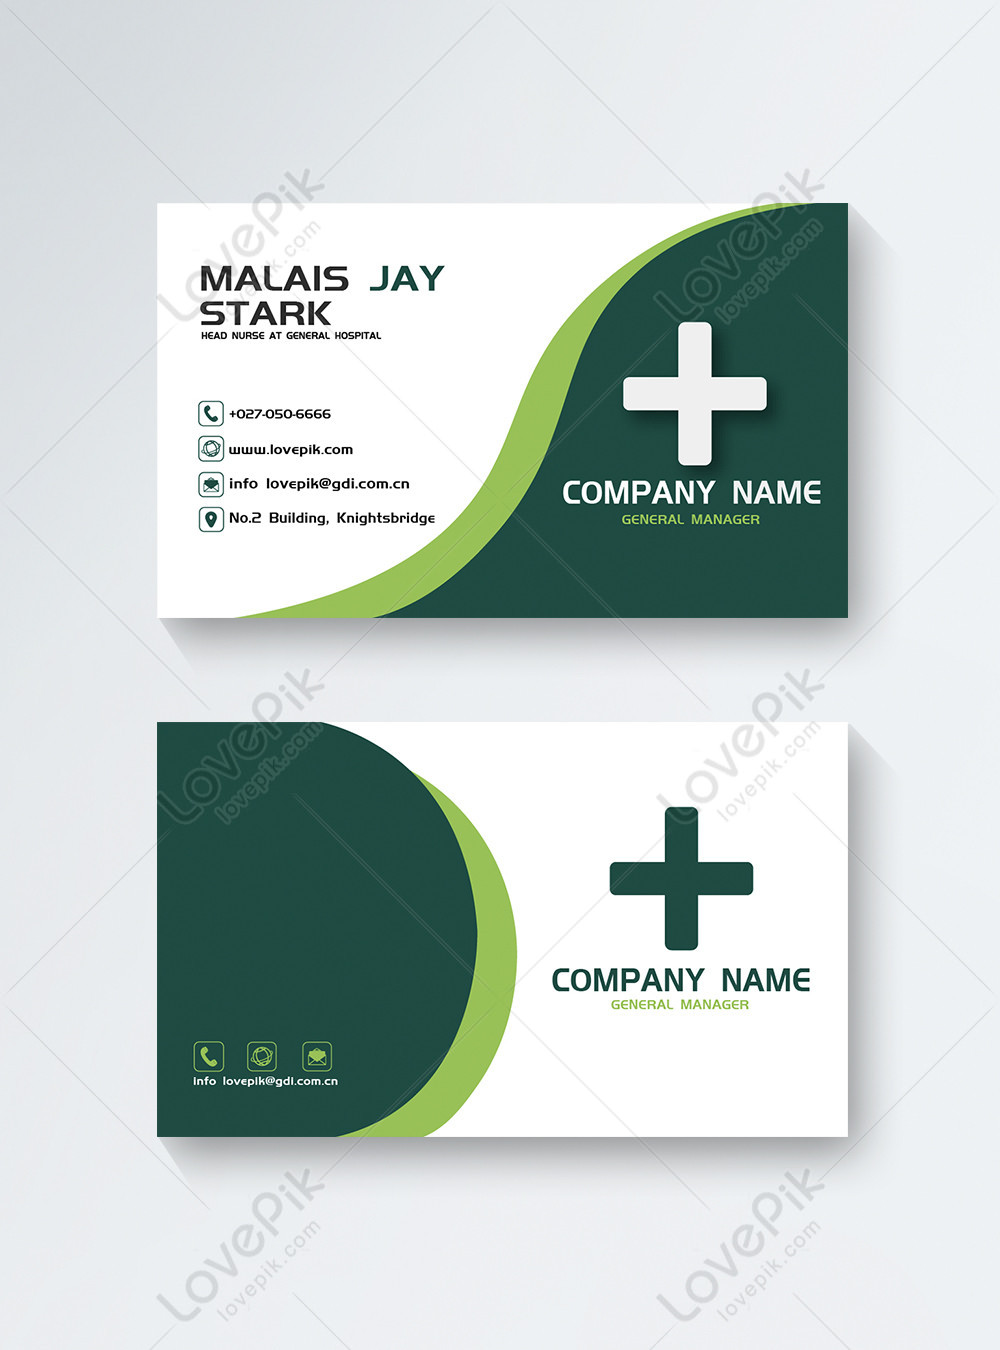 Medical business cards template image_picture free download Intended For Medical Business Cards Templates Free